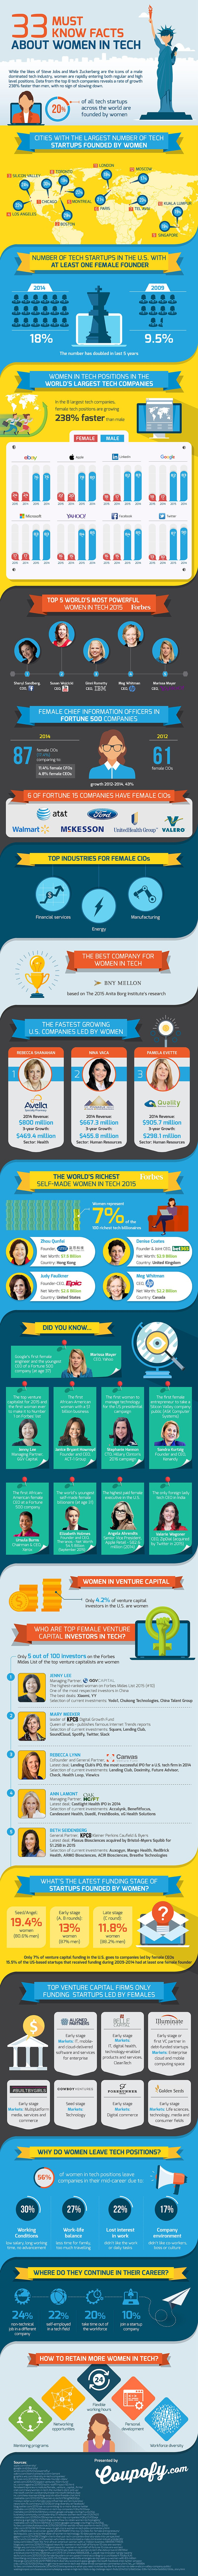 33 Must Know Facts About Women In Tech - Infographic